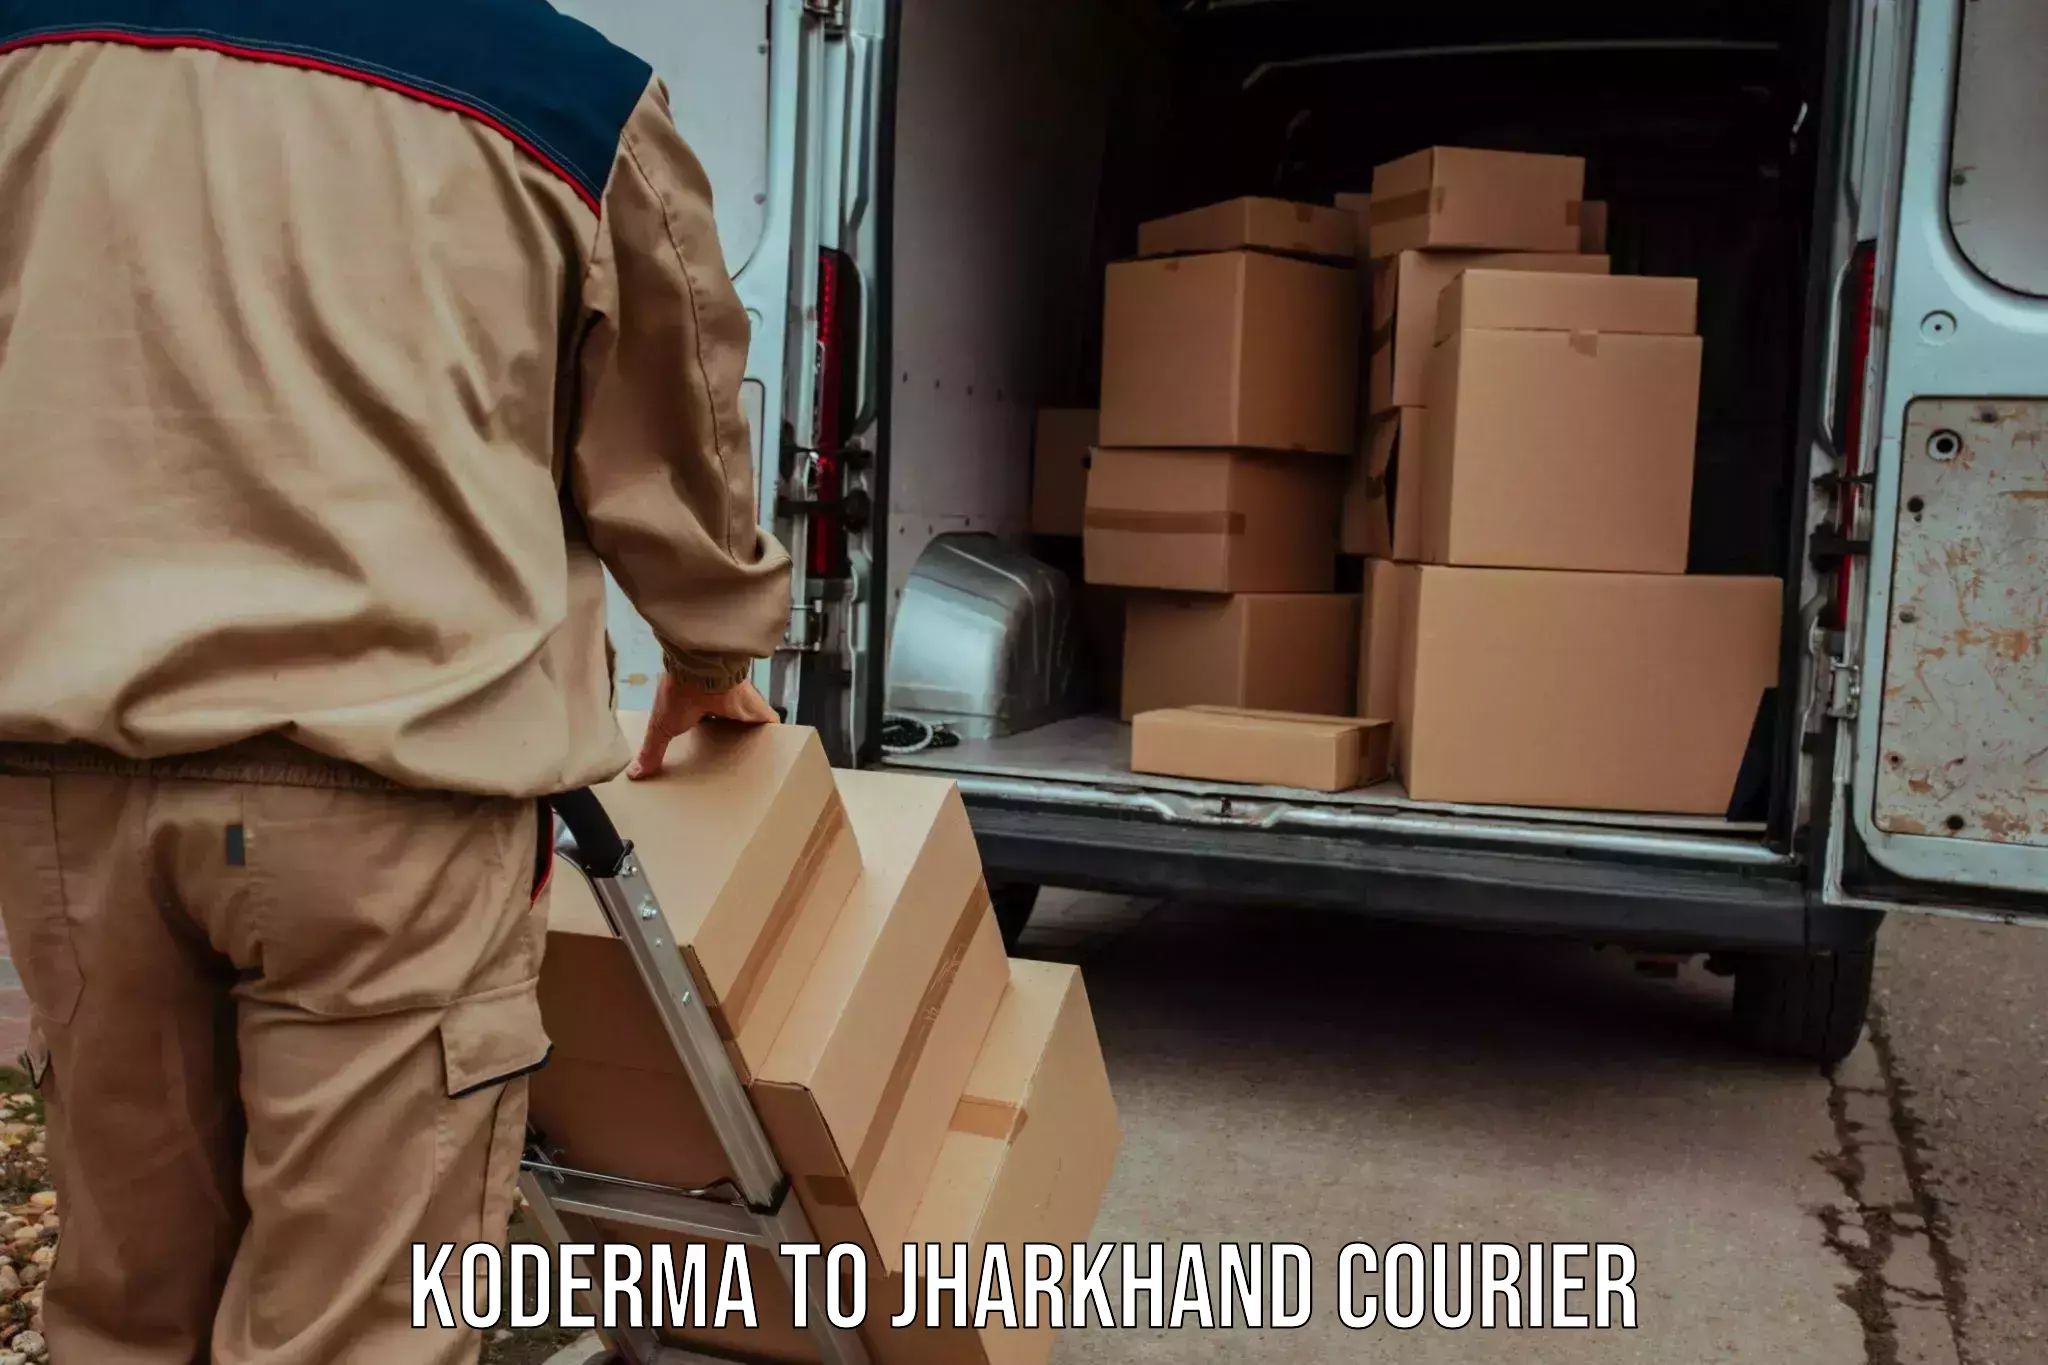 Express delivery capabilities Koderma to Peterbar